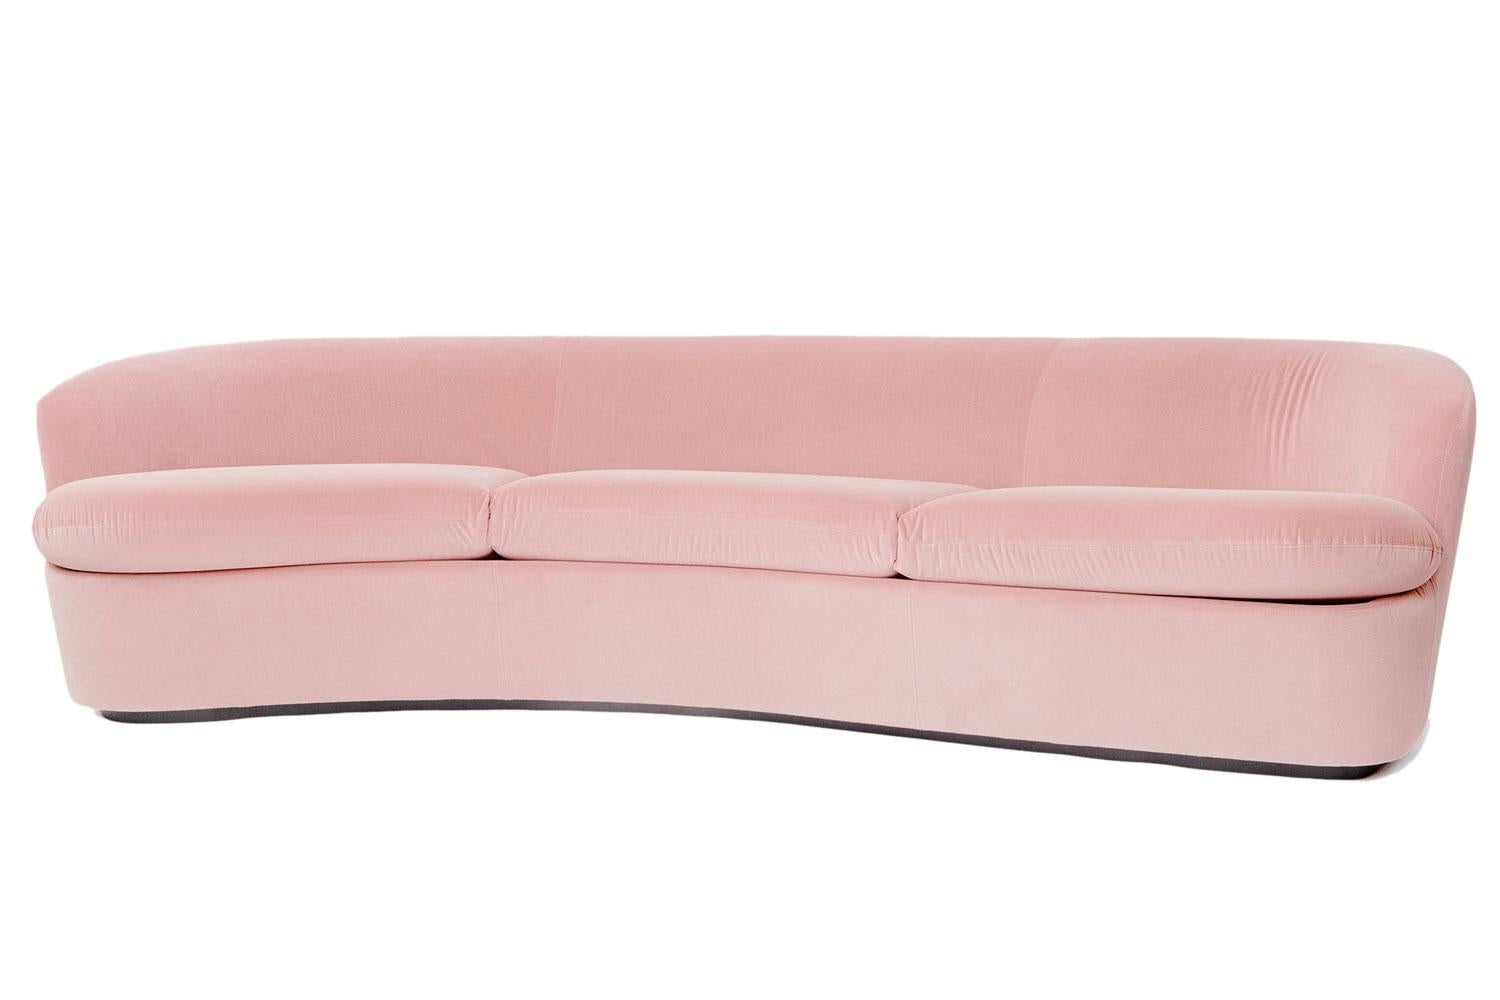 Orla Left Curved Sofa By Cappellini

This Orla three-seater, rounded sofa designed by Jasper Morrison is defined by the classic and contemporary stylistic elements and is featured in the collection of the Tate Modern, in London. Characterized by